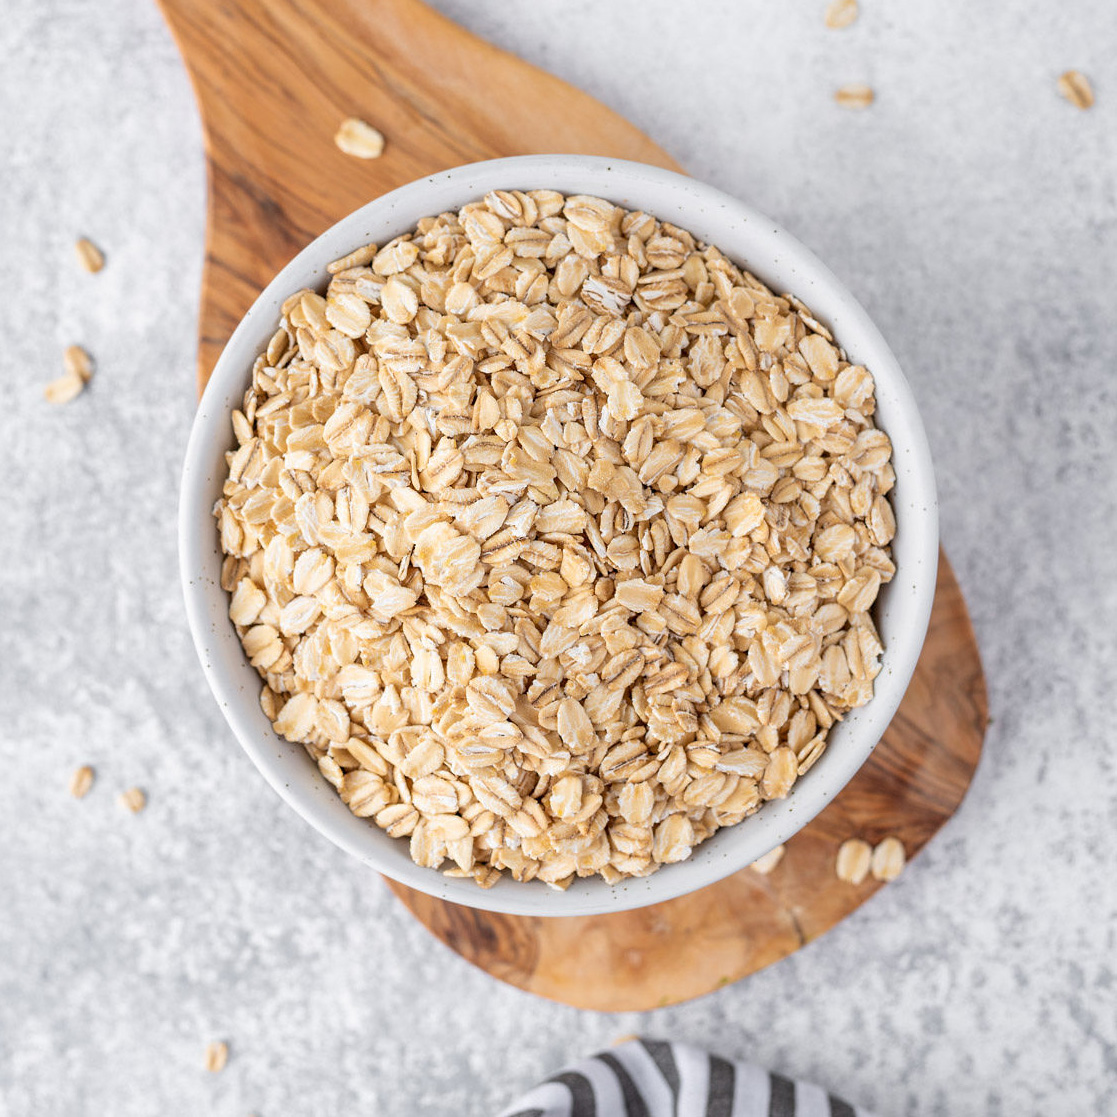 How To Make Oat Flour 1